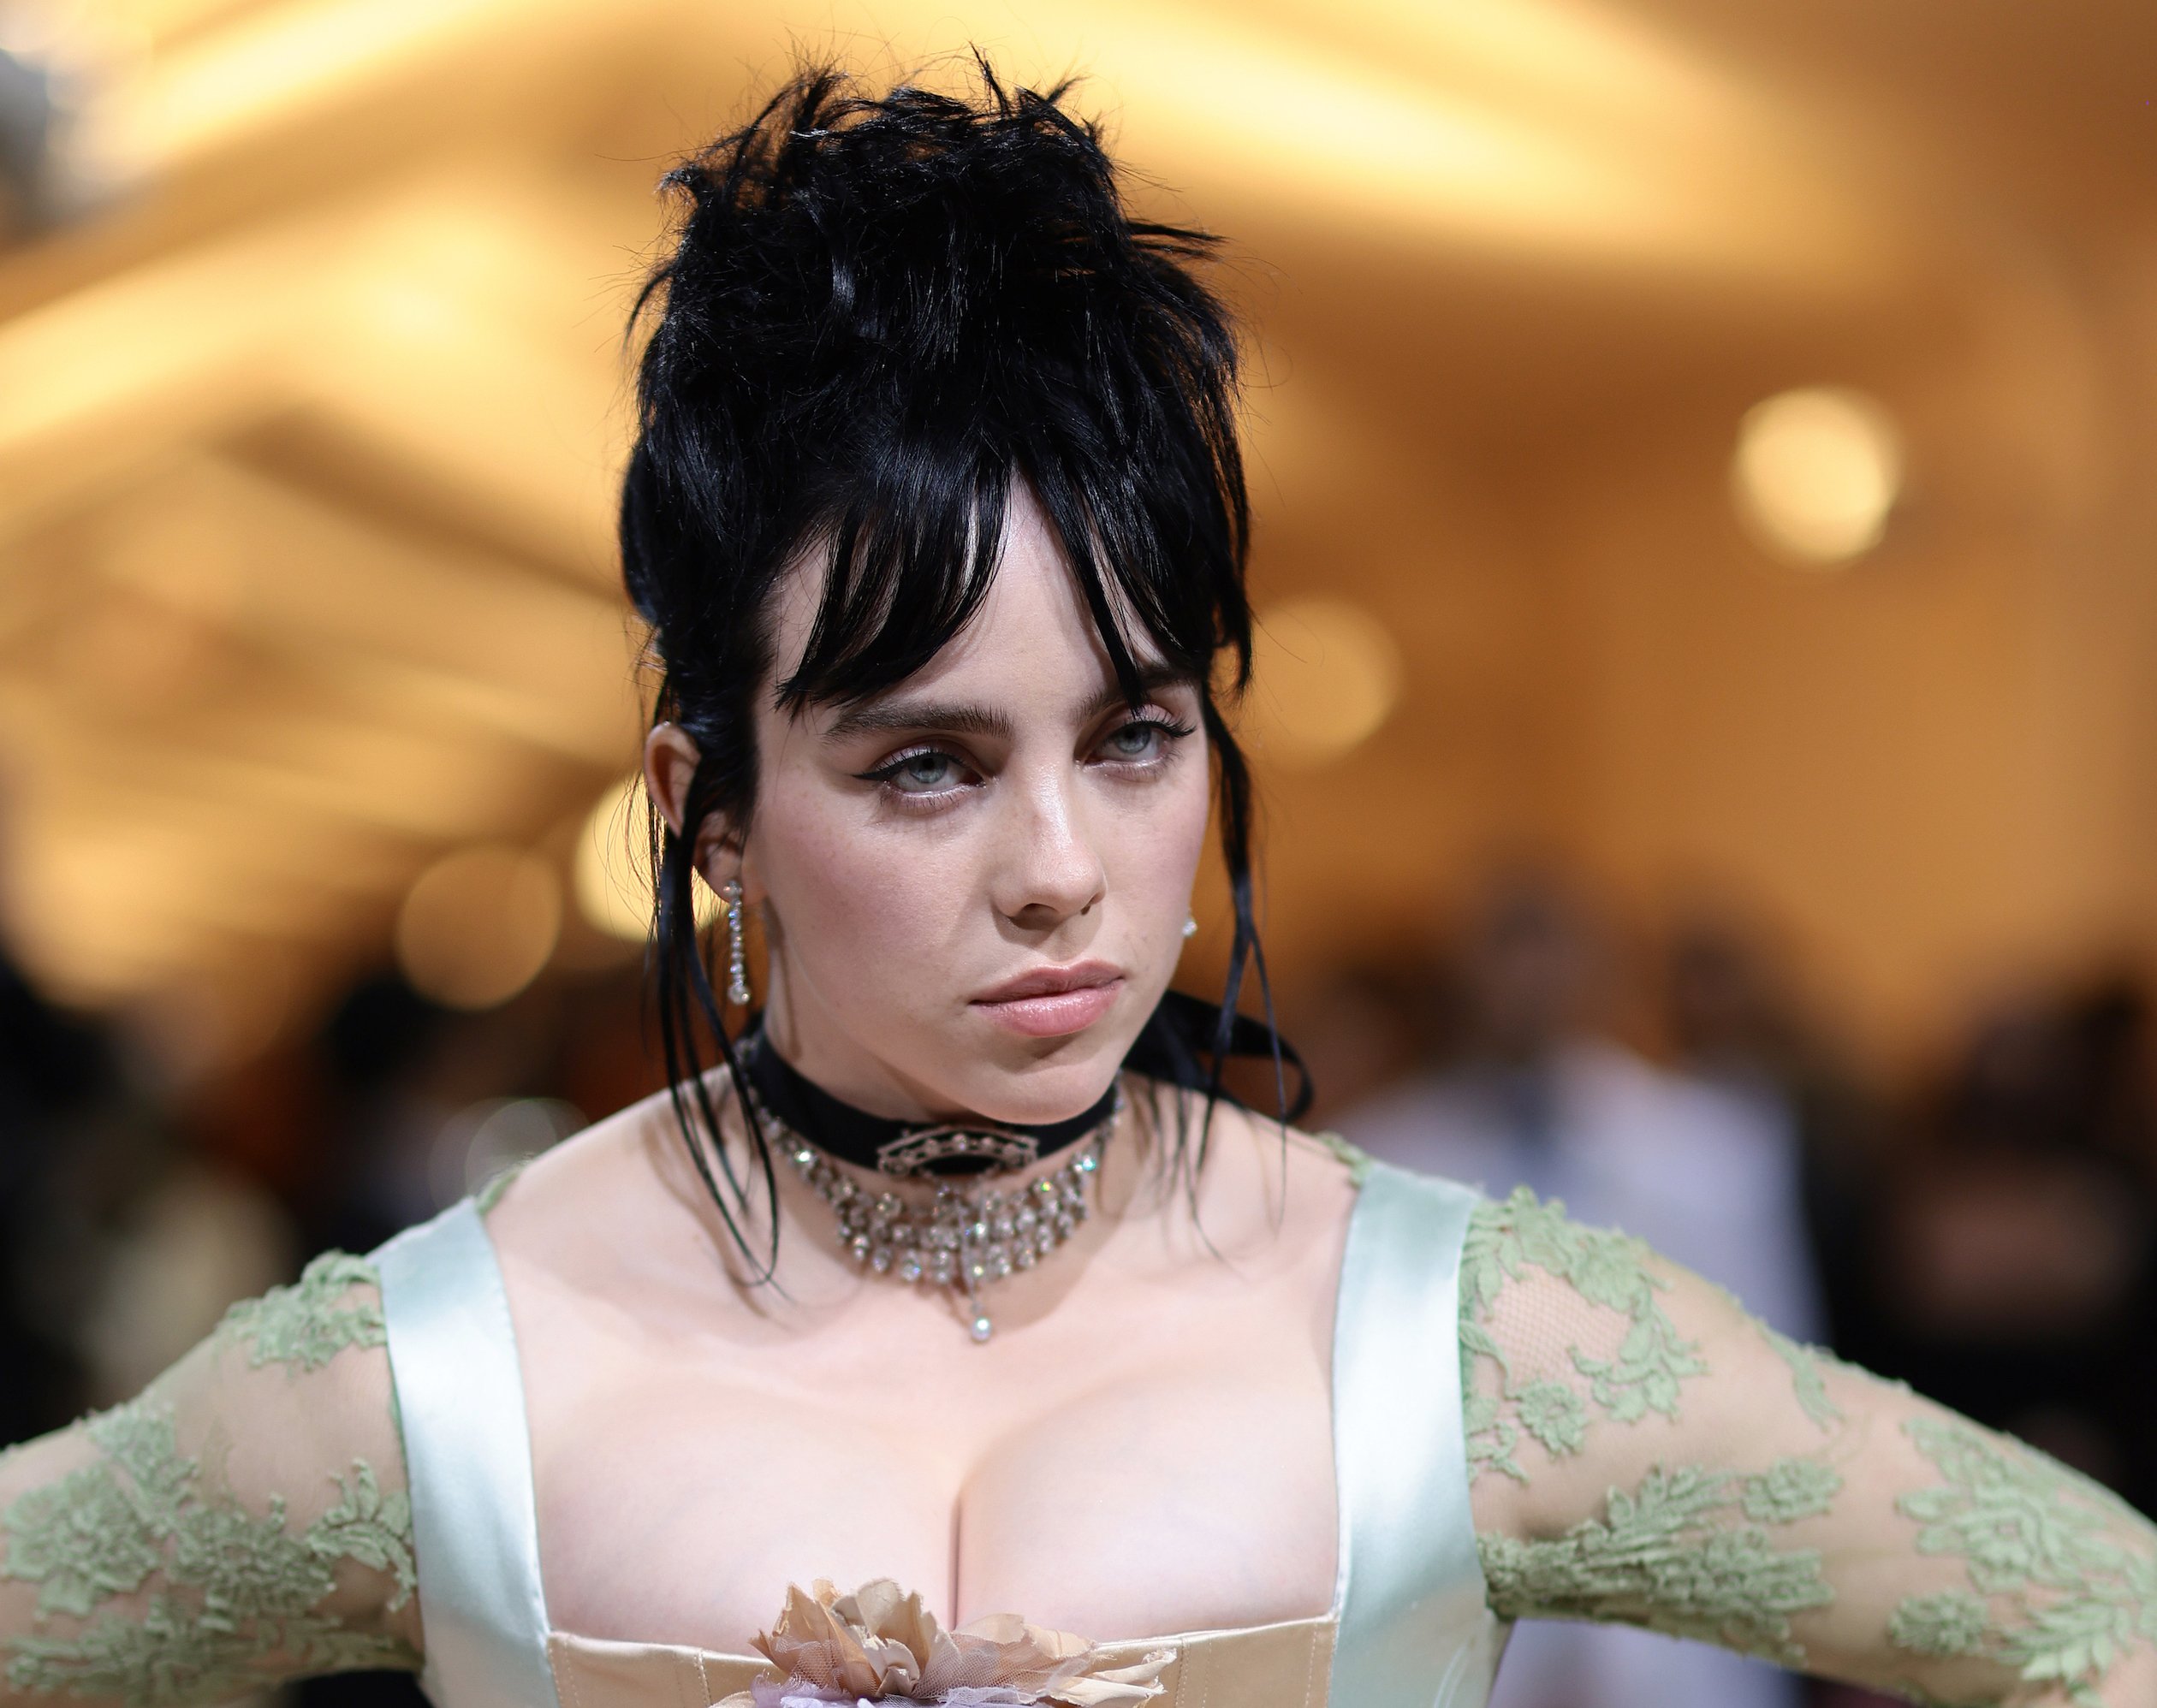 Billie Eilish attends The 2022 Met Gala Celebrating 'In America: An Anthology of Fashion' at The Metropolitan Museum of Art